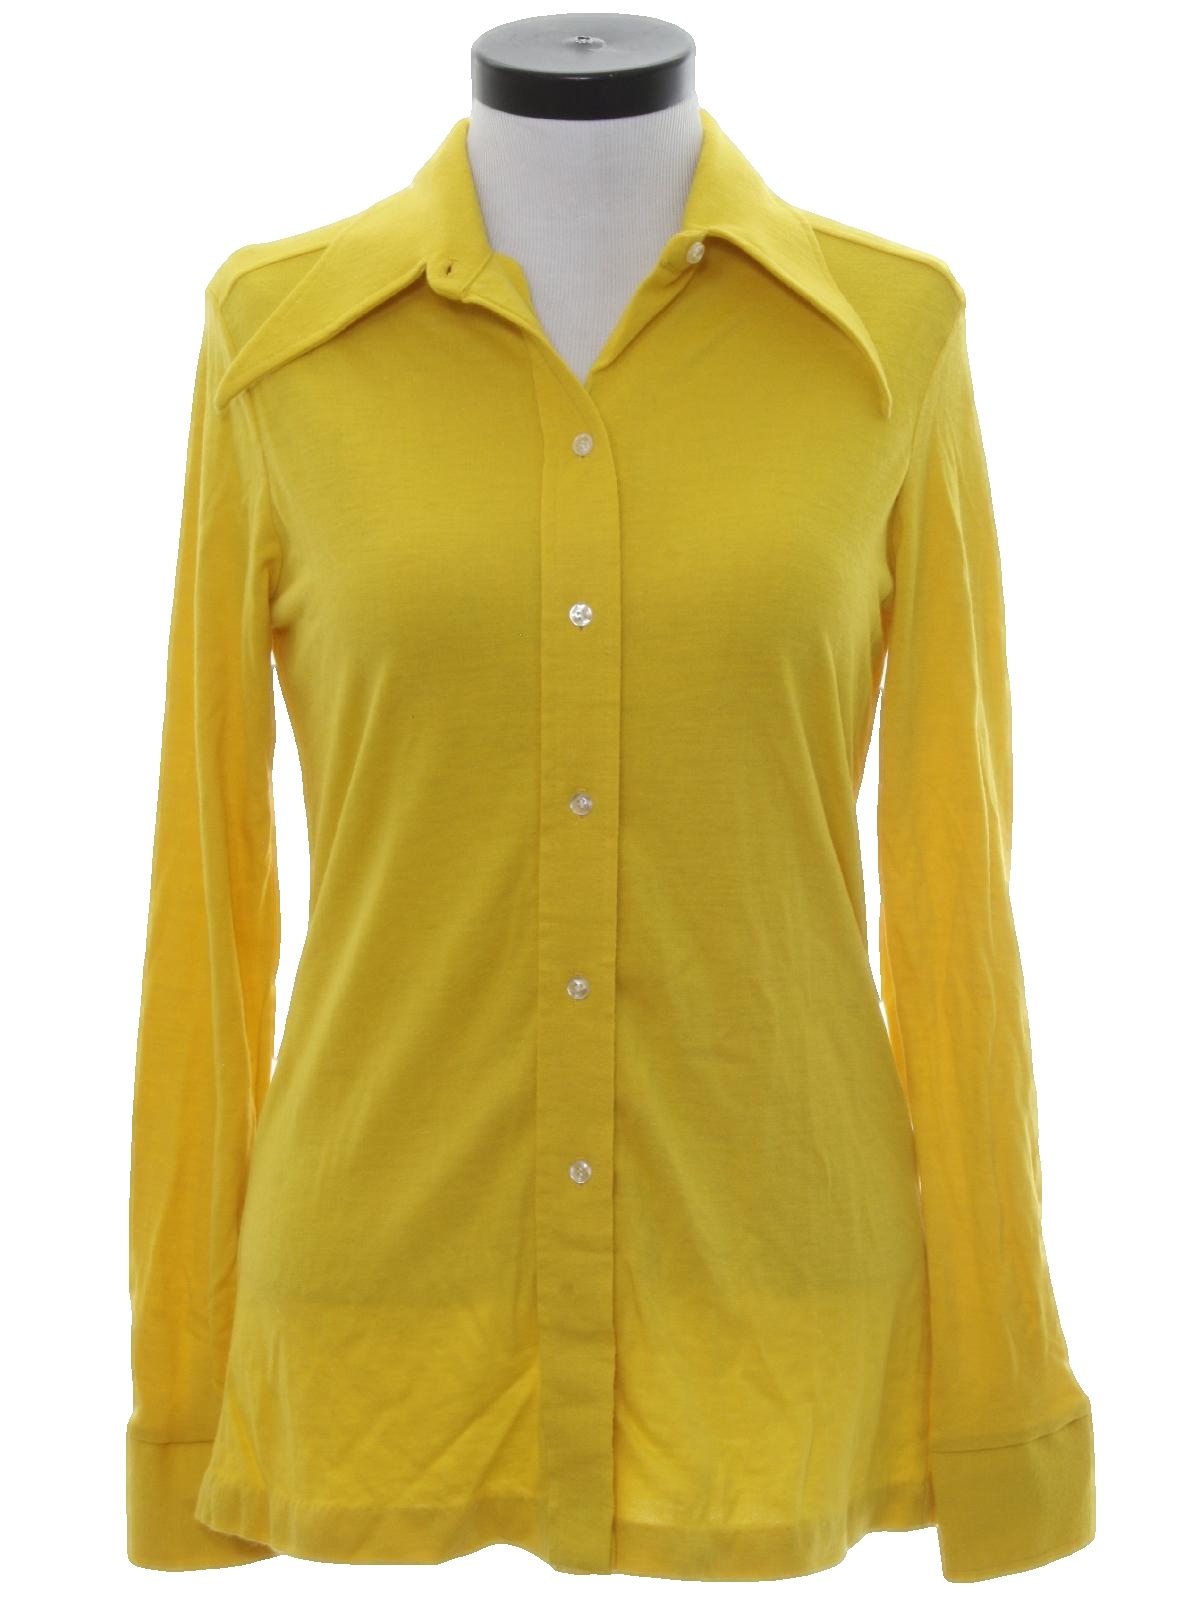 1970's Vintage Sears Disco Shirt: 70s -Sears- Womens mustard background ...